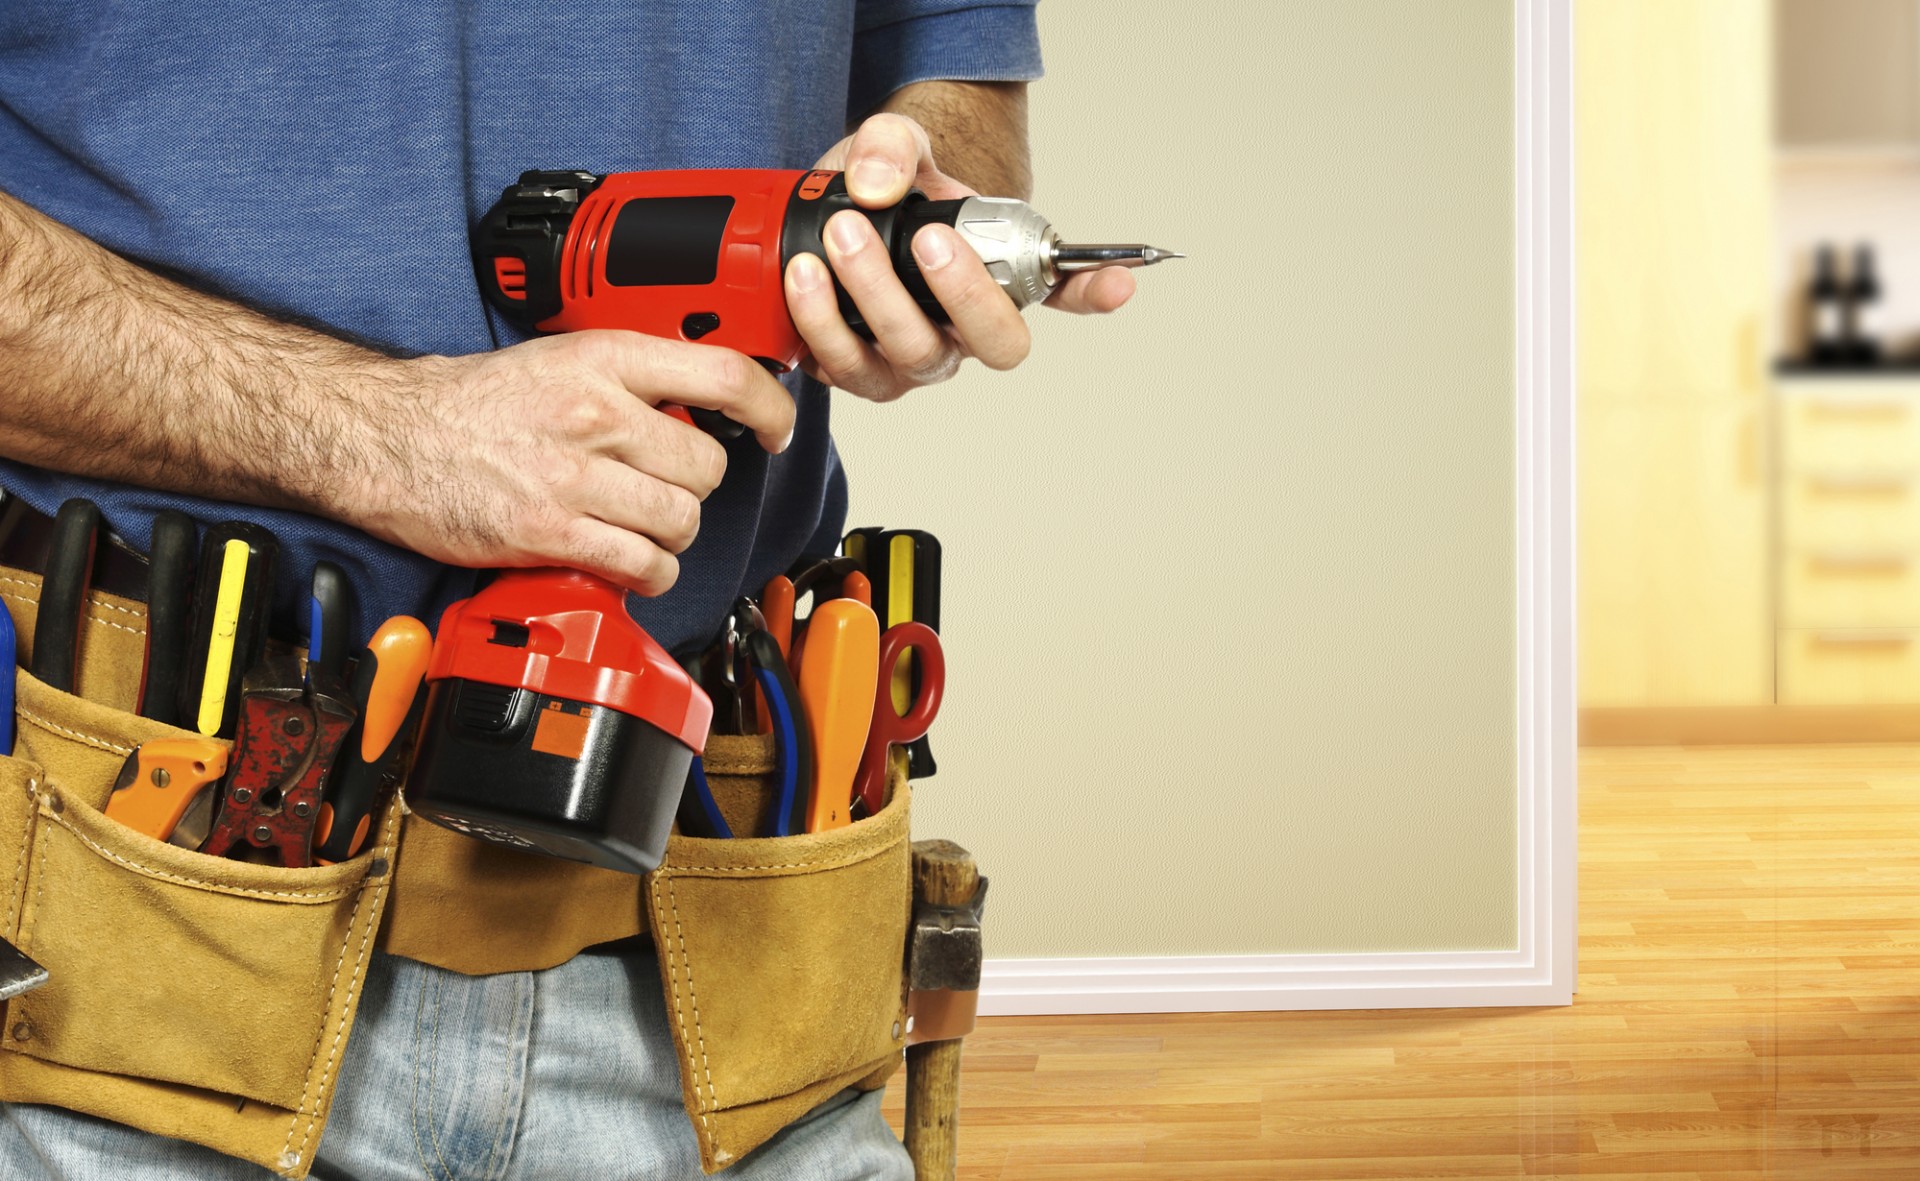 Residential Handyman Services for Design and Build Projects - wide 5